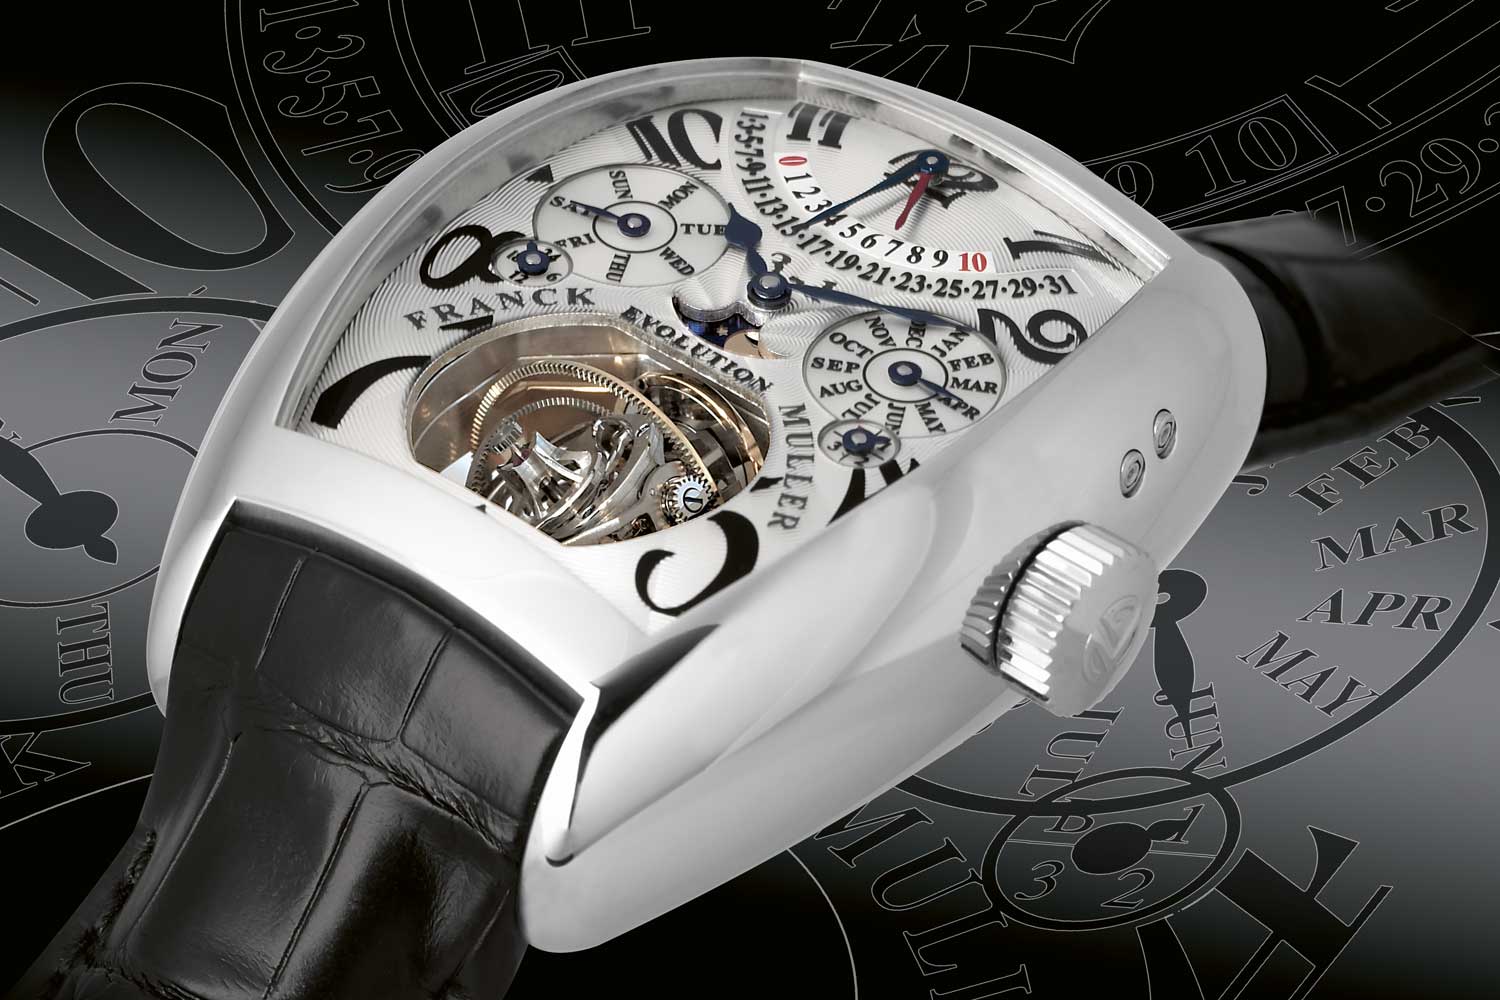 The Evolution 3-1 featuring the world's first triple-axis tourbillon